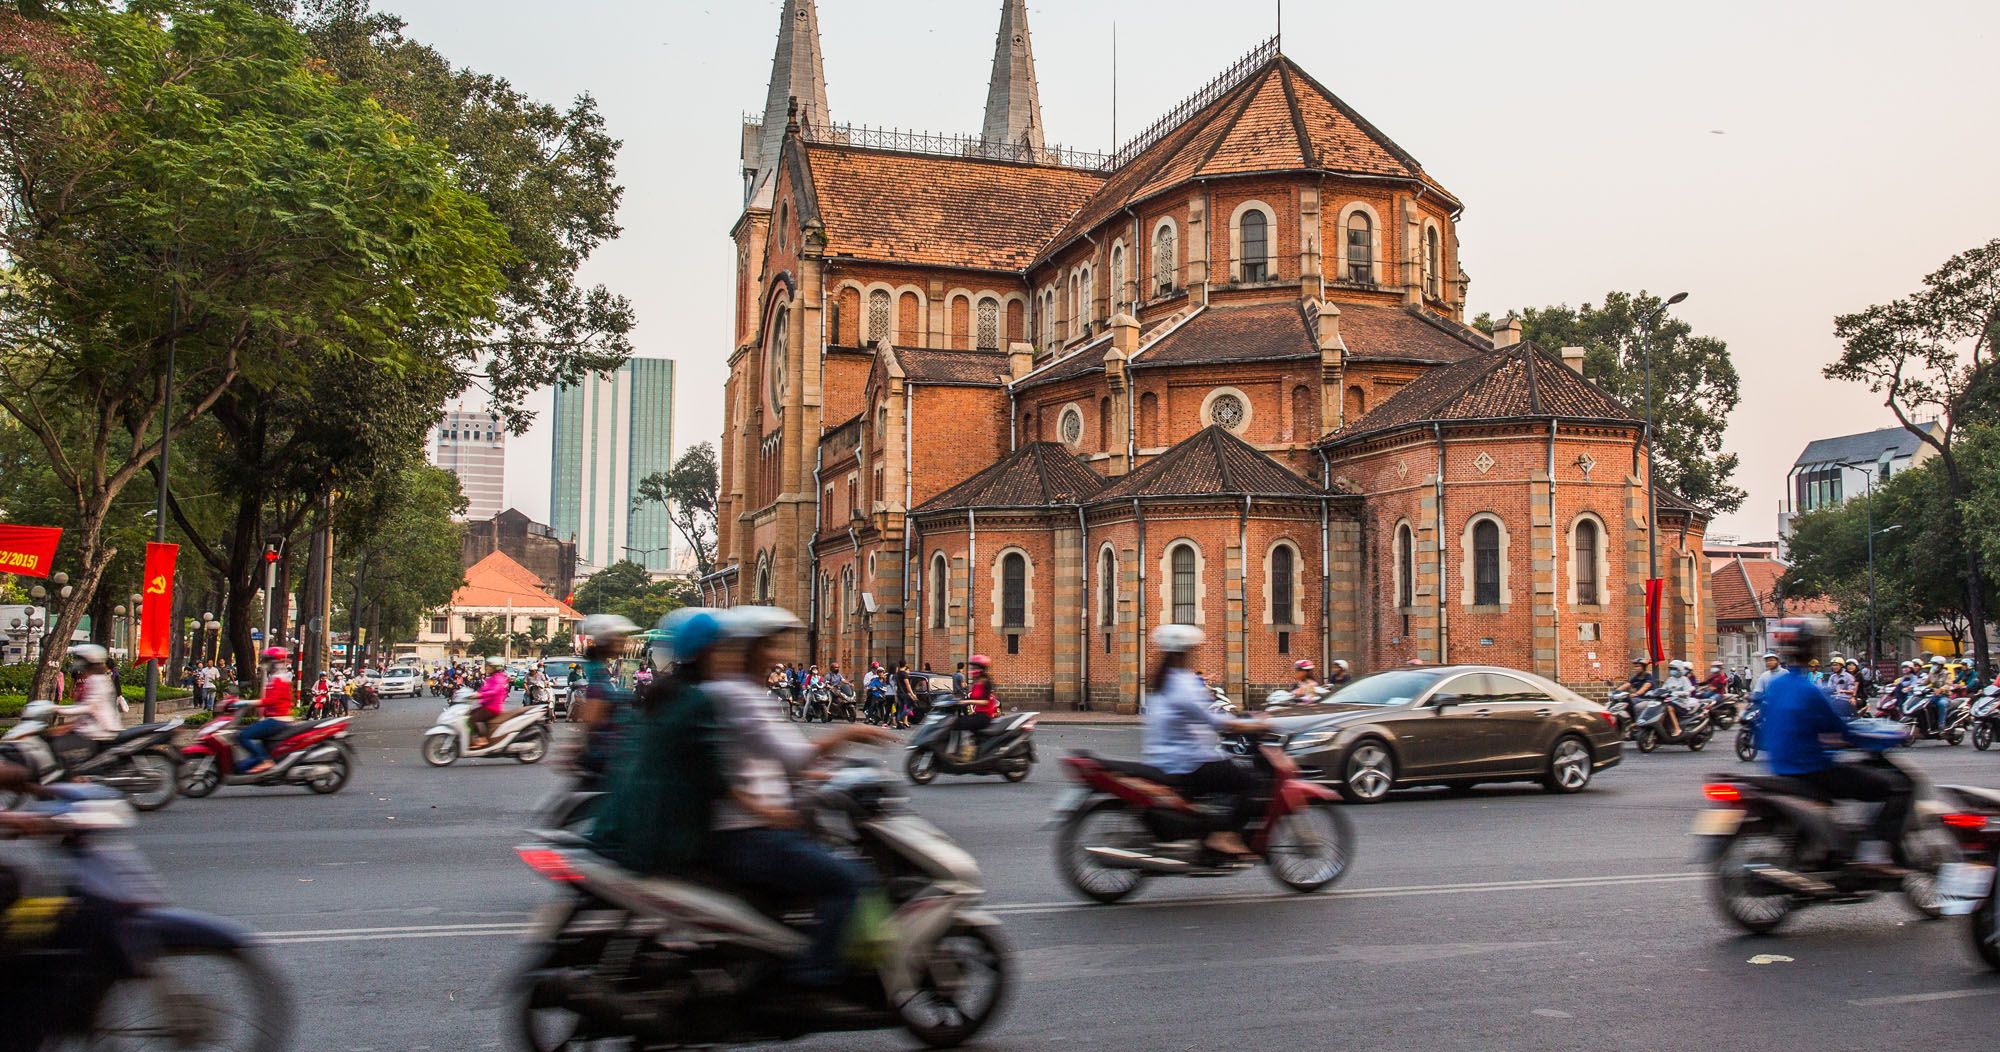 Featured image for “Two Days in Ho Chi Minh City, Vietnam”